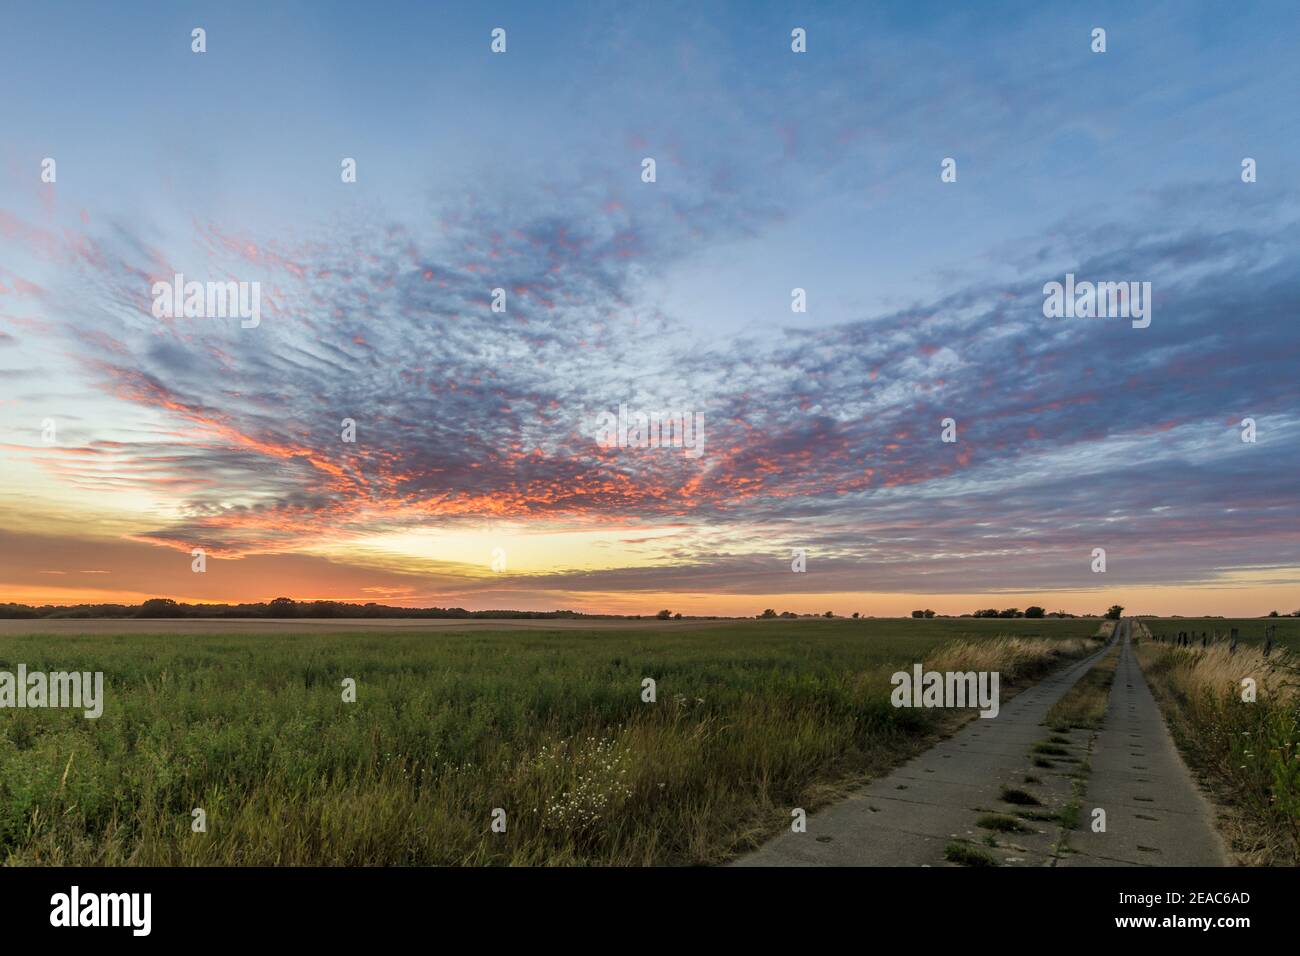 View over slab path between harvested fields and meadows with a dramatic sky at sunset Stock Photo